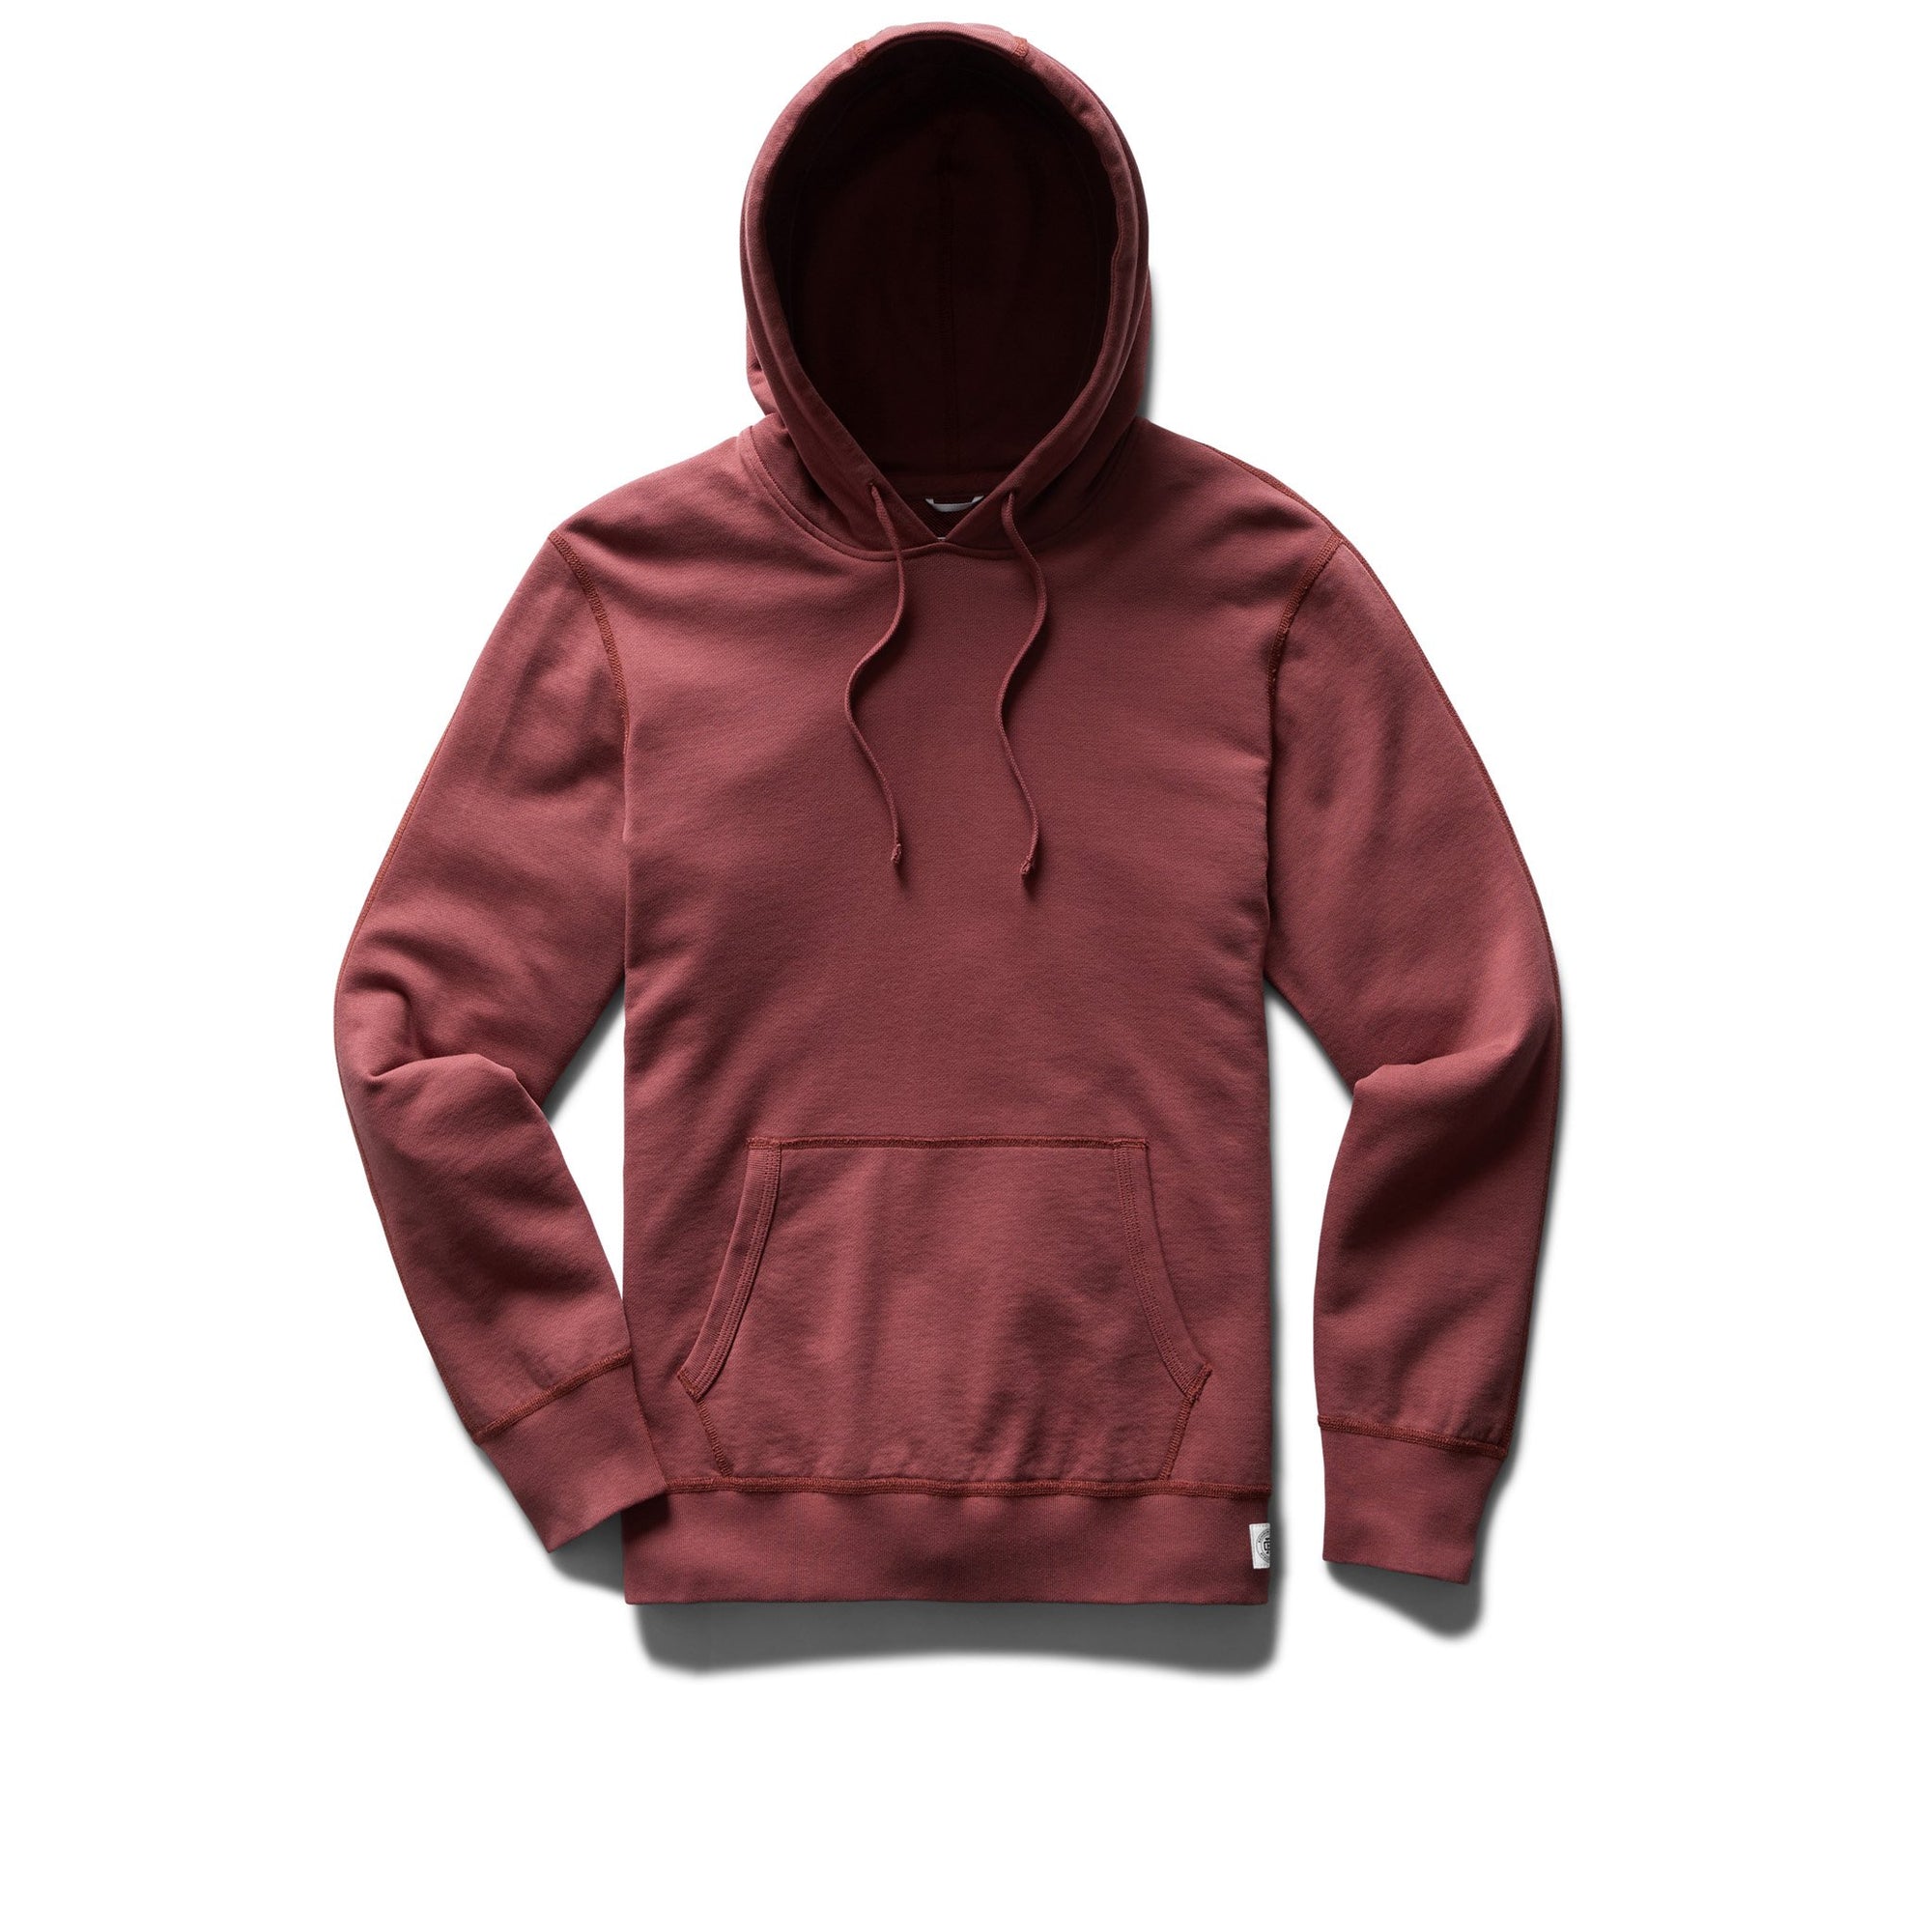 Reigning Champ Lightweight Terry Pullover Hoodie in Russet